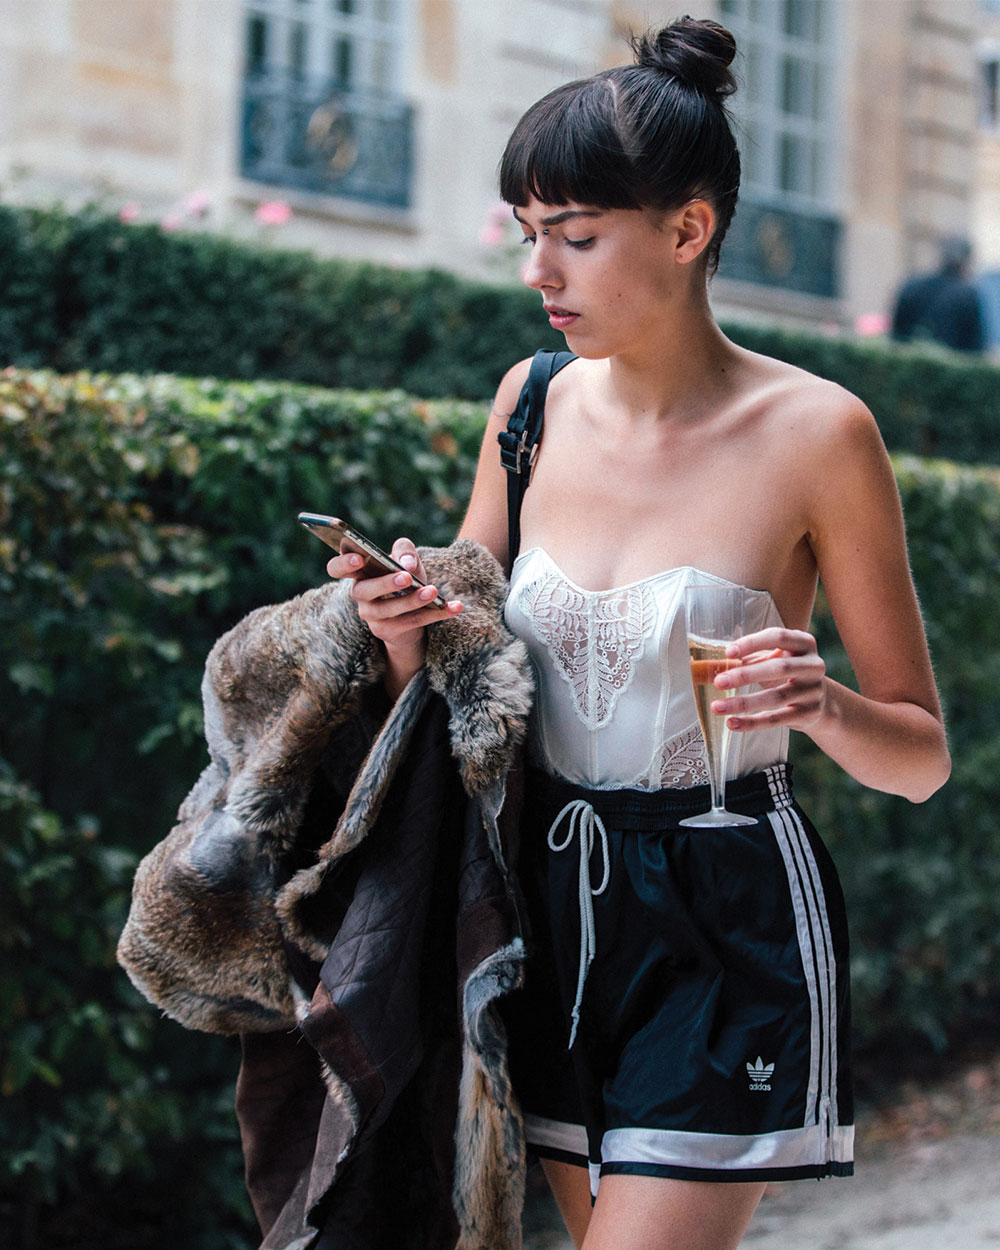 Model Kye Howell checks her phone and drinks champagne, while wearing a white corset top, black sporty Adidas shorts and the attitude of our dreams after the Dior show in September 2016.